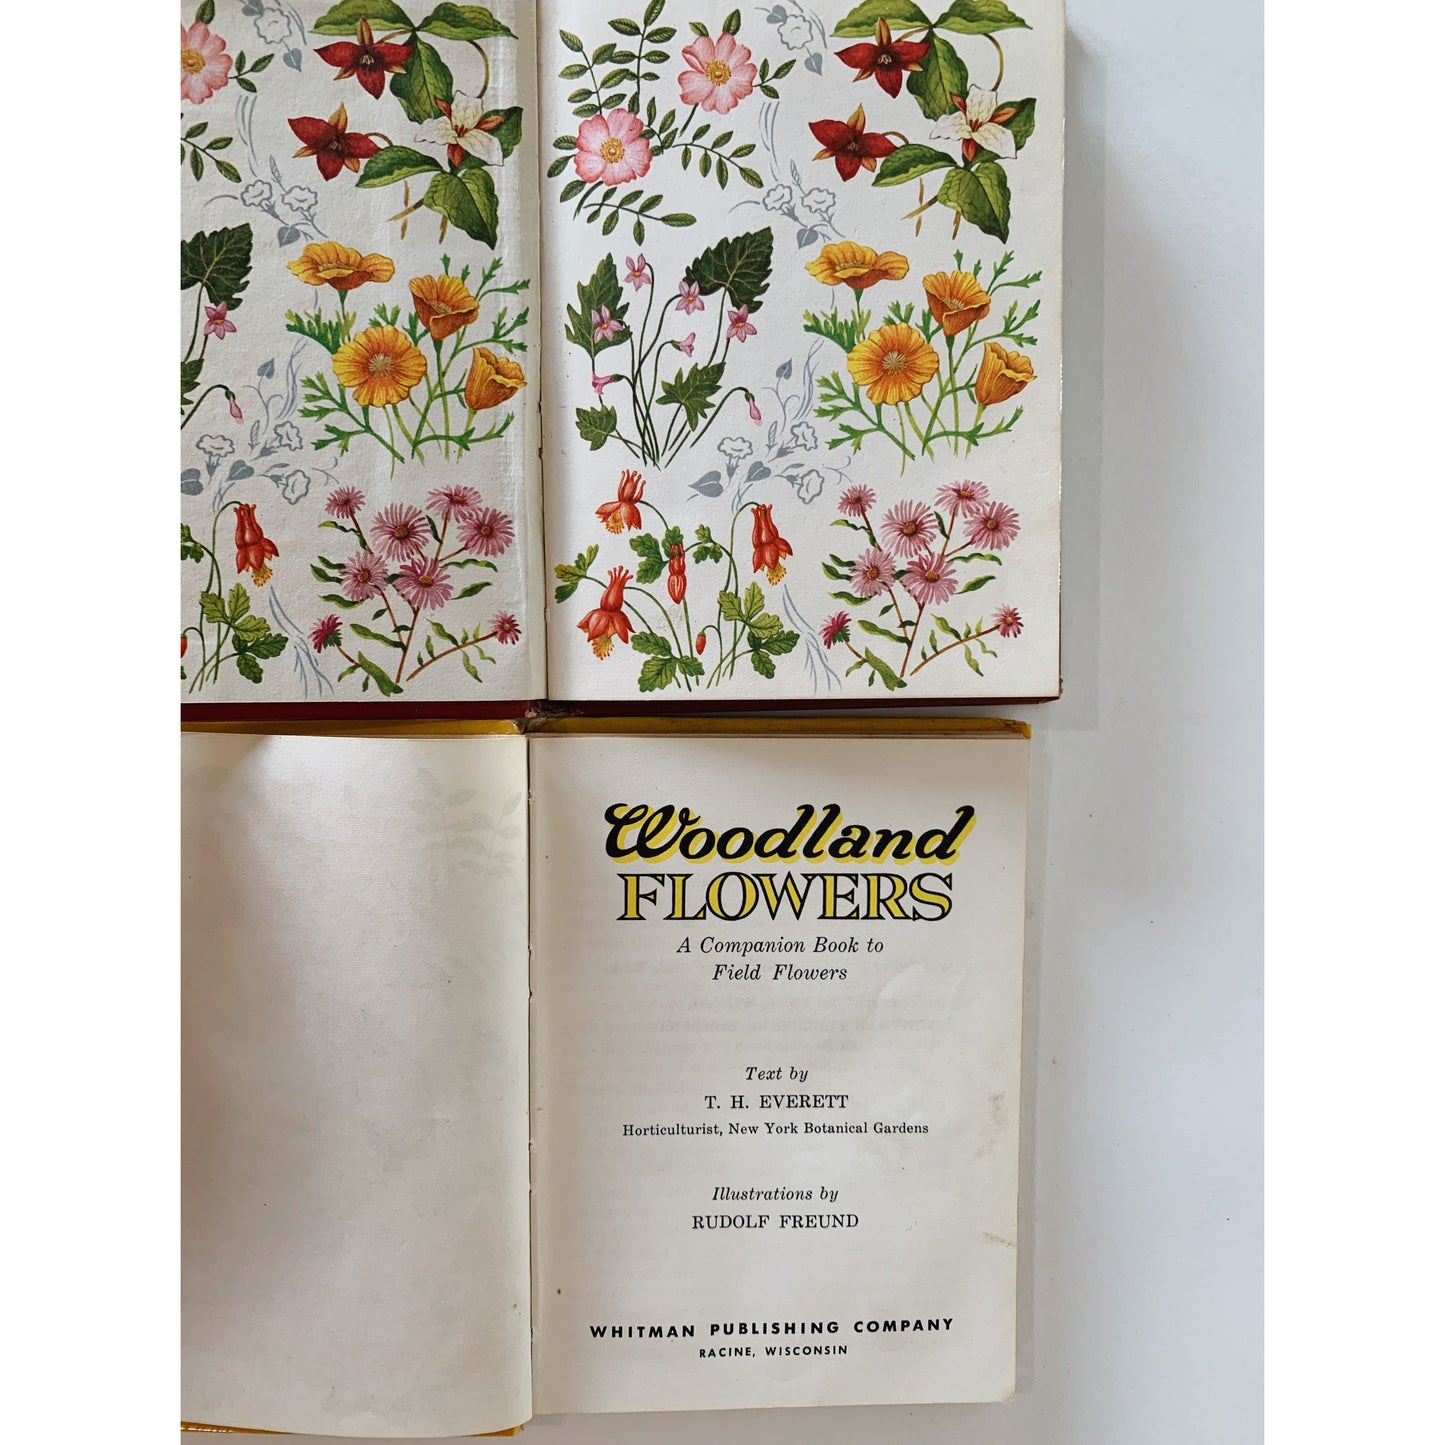 Field Flowers and Woodland Flowers, 1956 Whitman Nature Book